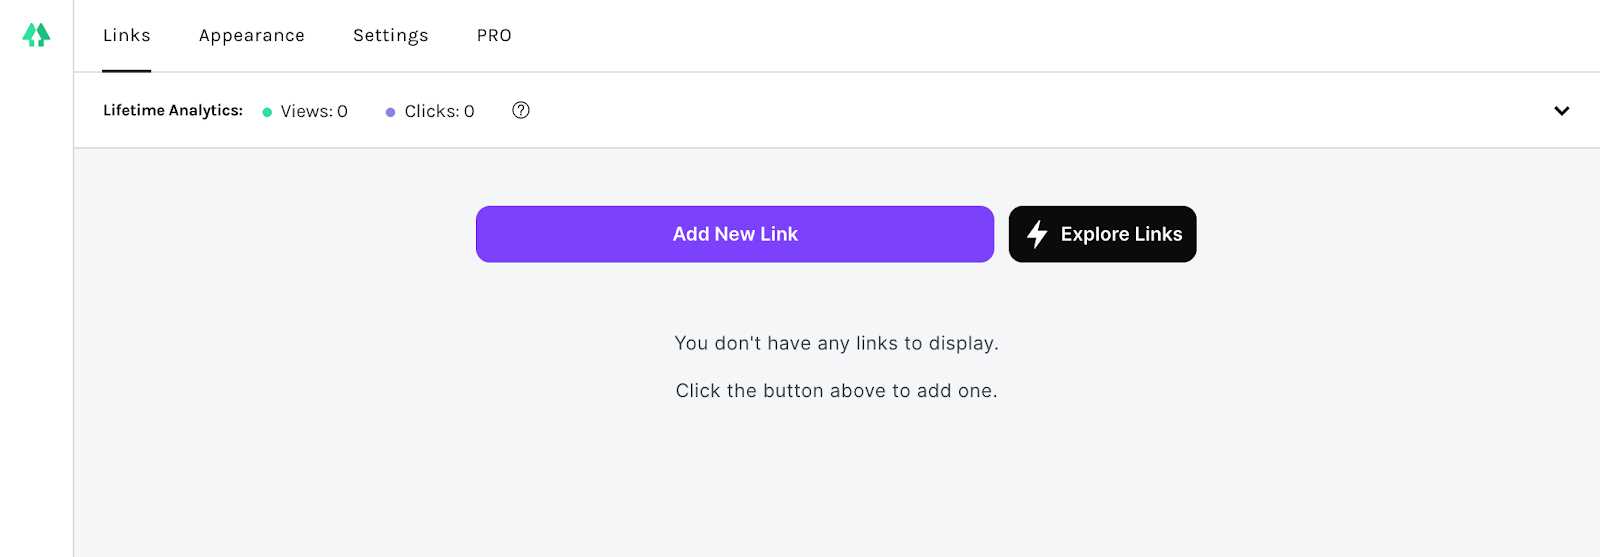 how to create linktree on instagram step 5: link addition page 